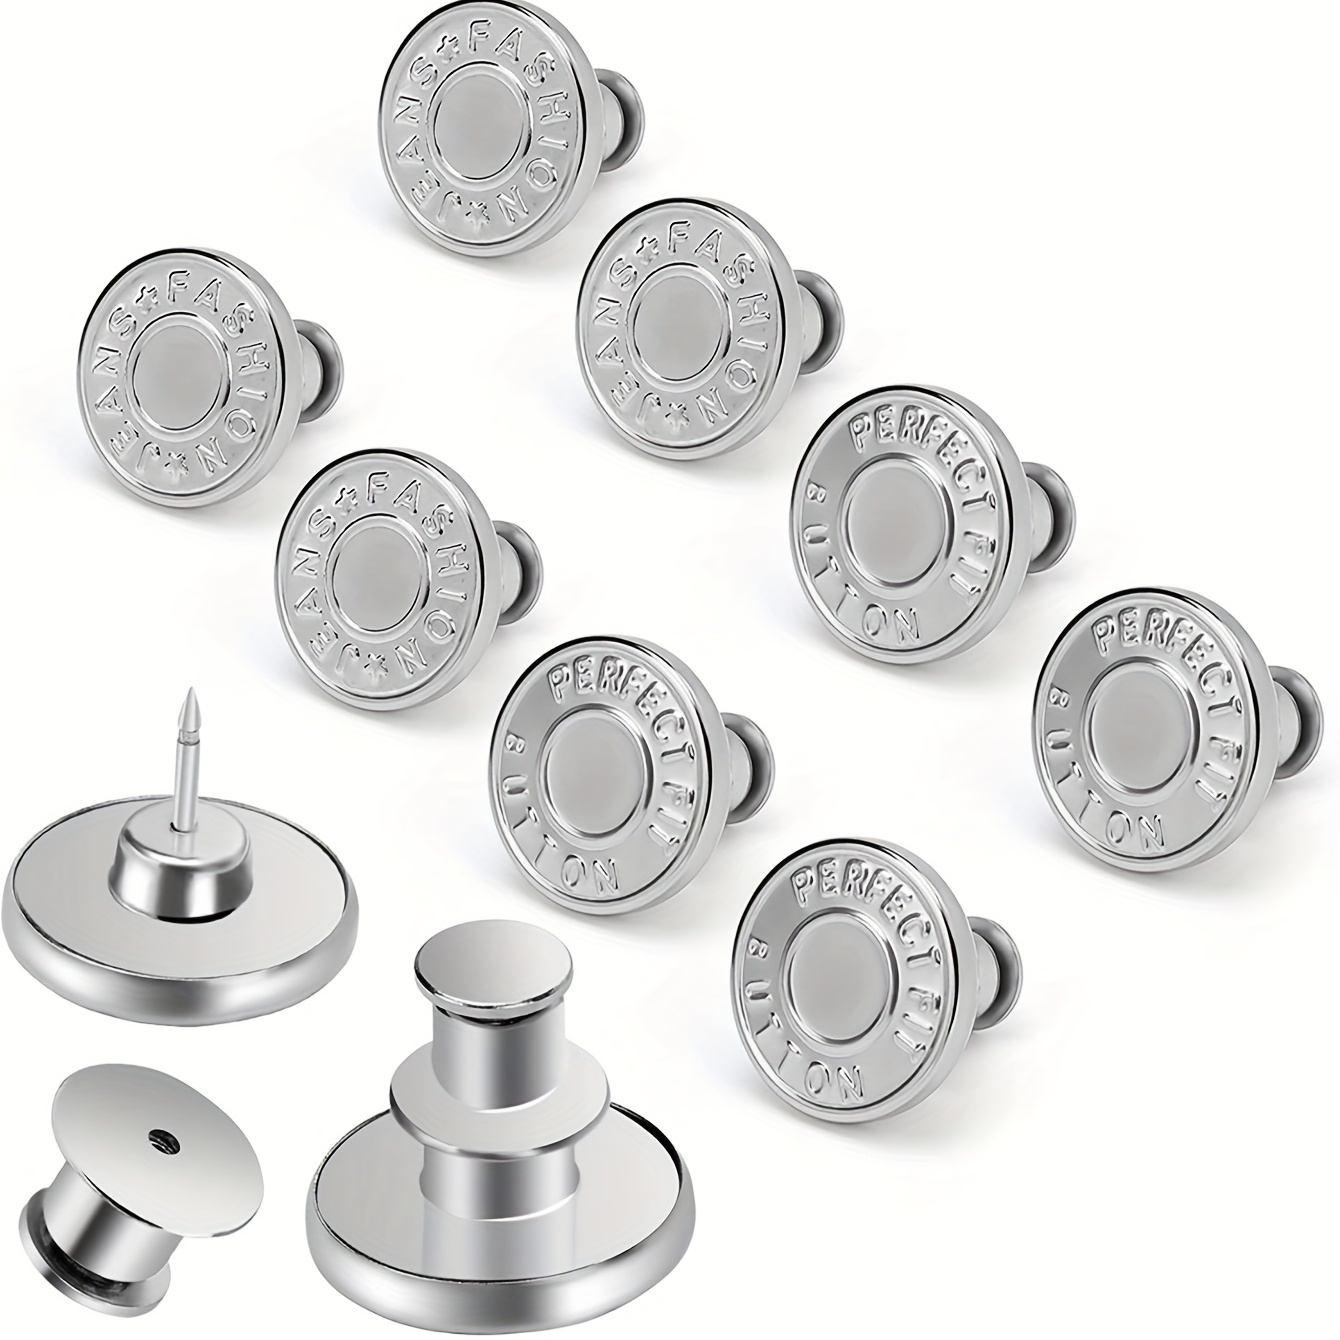  12 Sets Silver Jeans Buttons Replacement 17mm No Sewing  Metal Button Repair Kit Nailess Removable Jean Buttons Replacement Combo  Thread Rivets And Screwdrivers